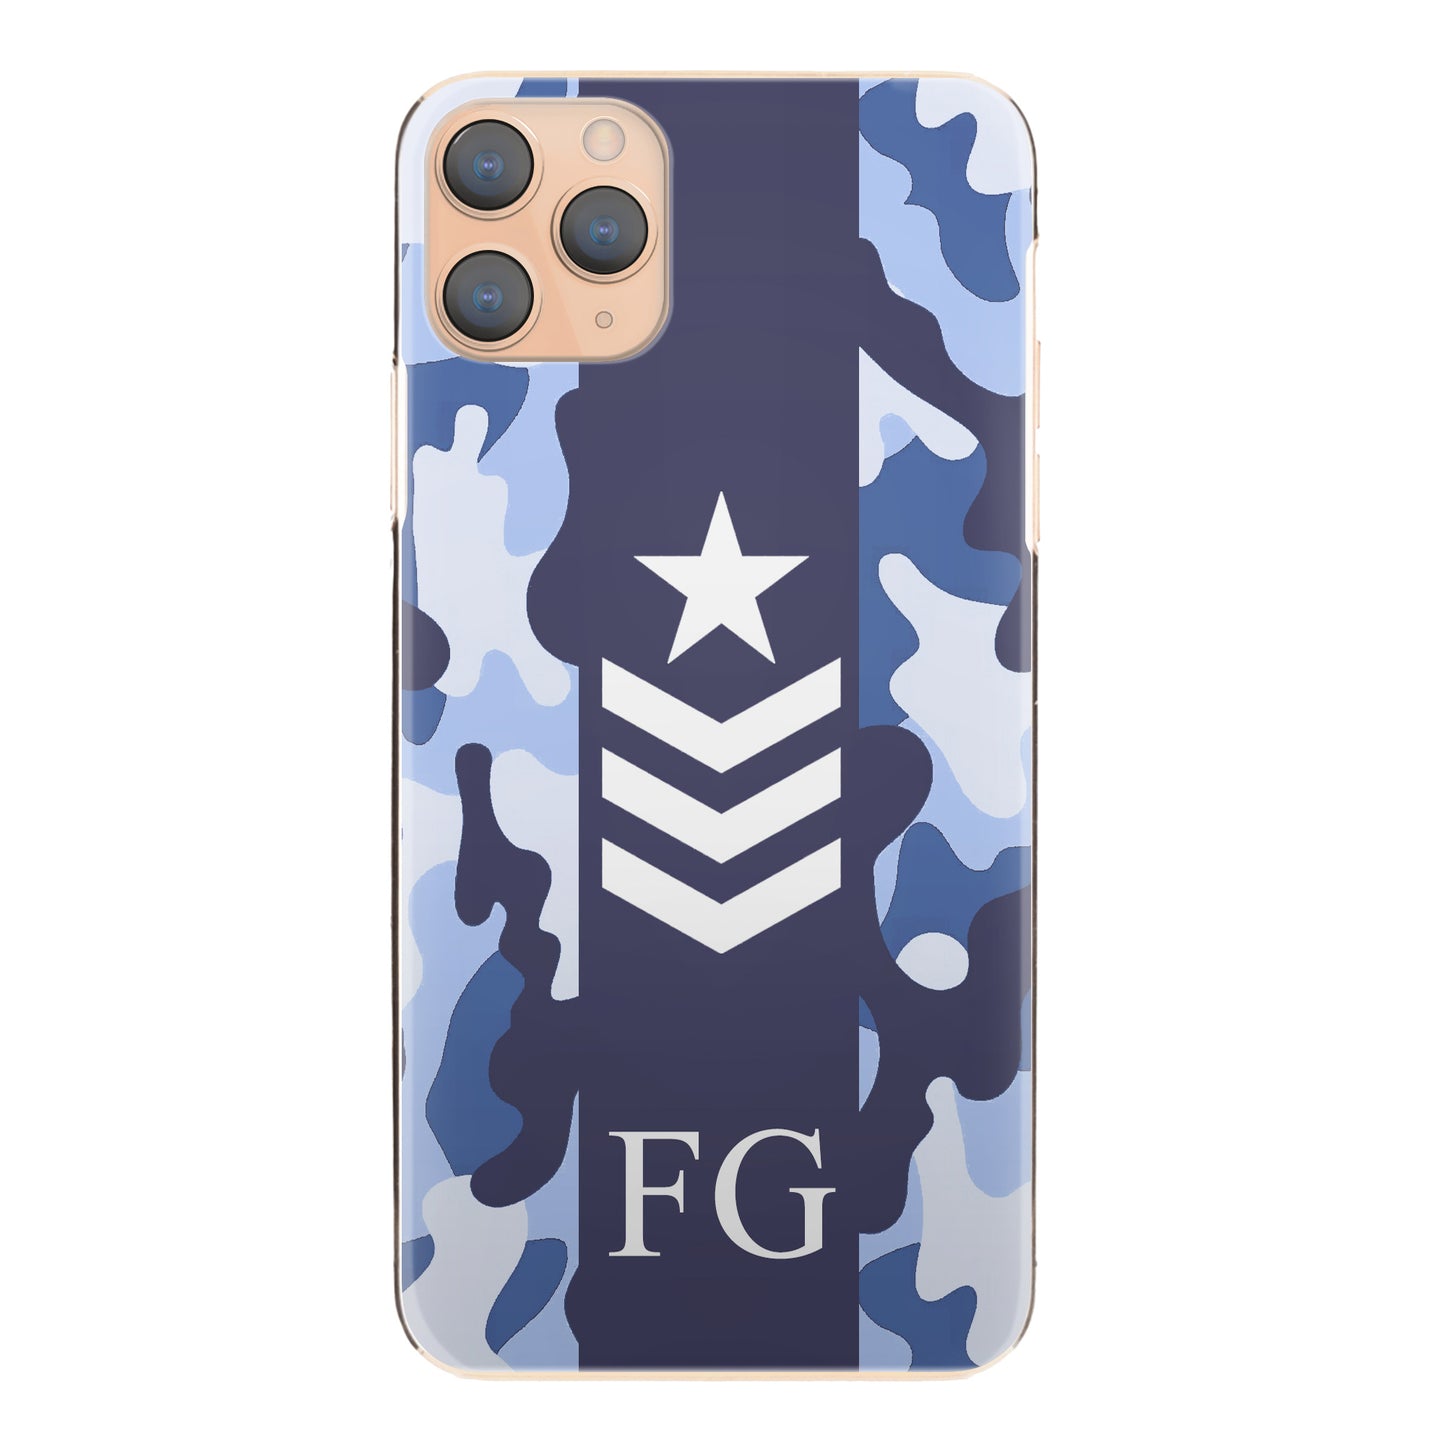 Personalised Apple iPhone Hard Case with Initials and Army Rank on Blue Camo